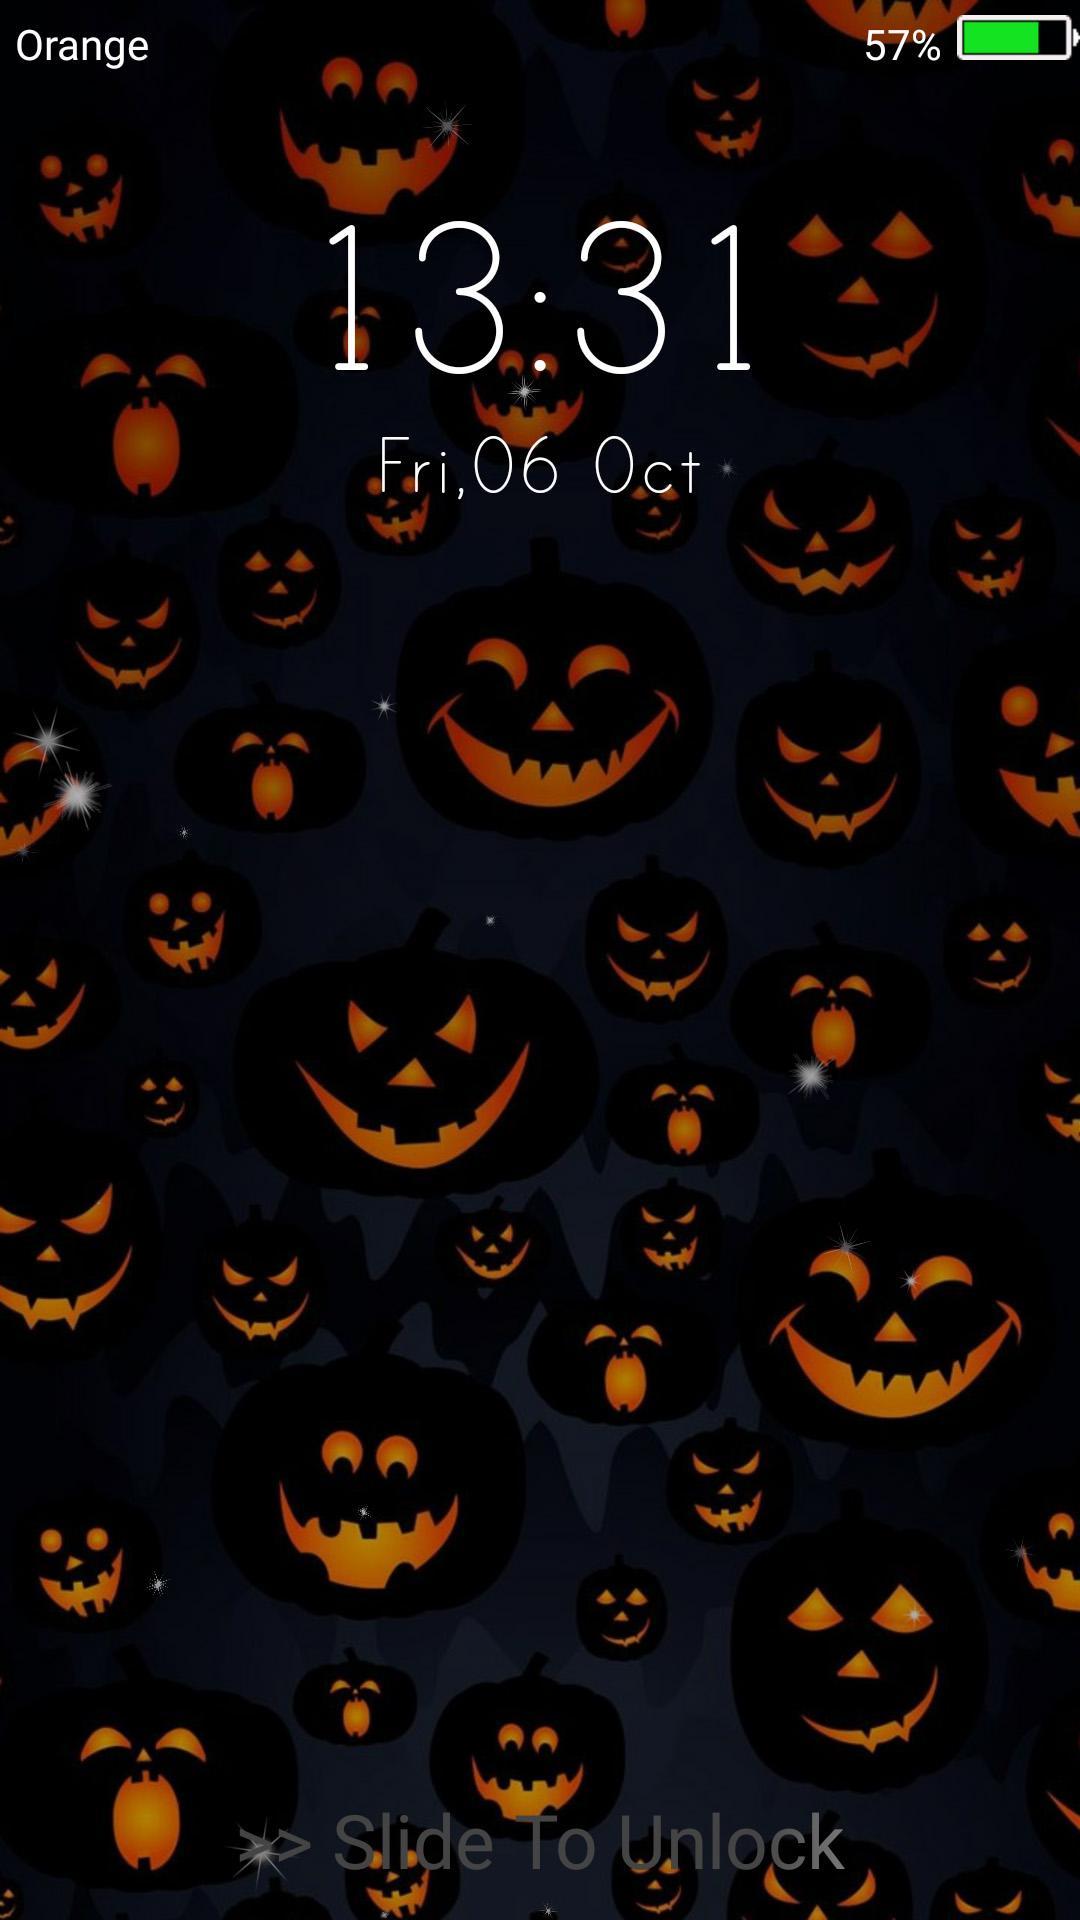 Halloween Live Wallpaper Lock Screen For Android Apk